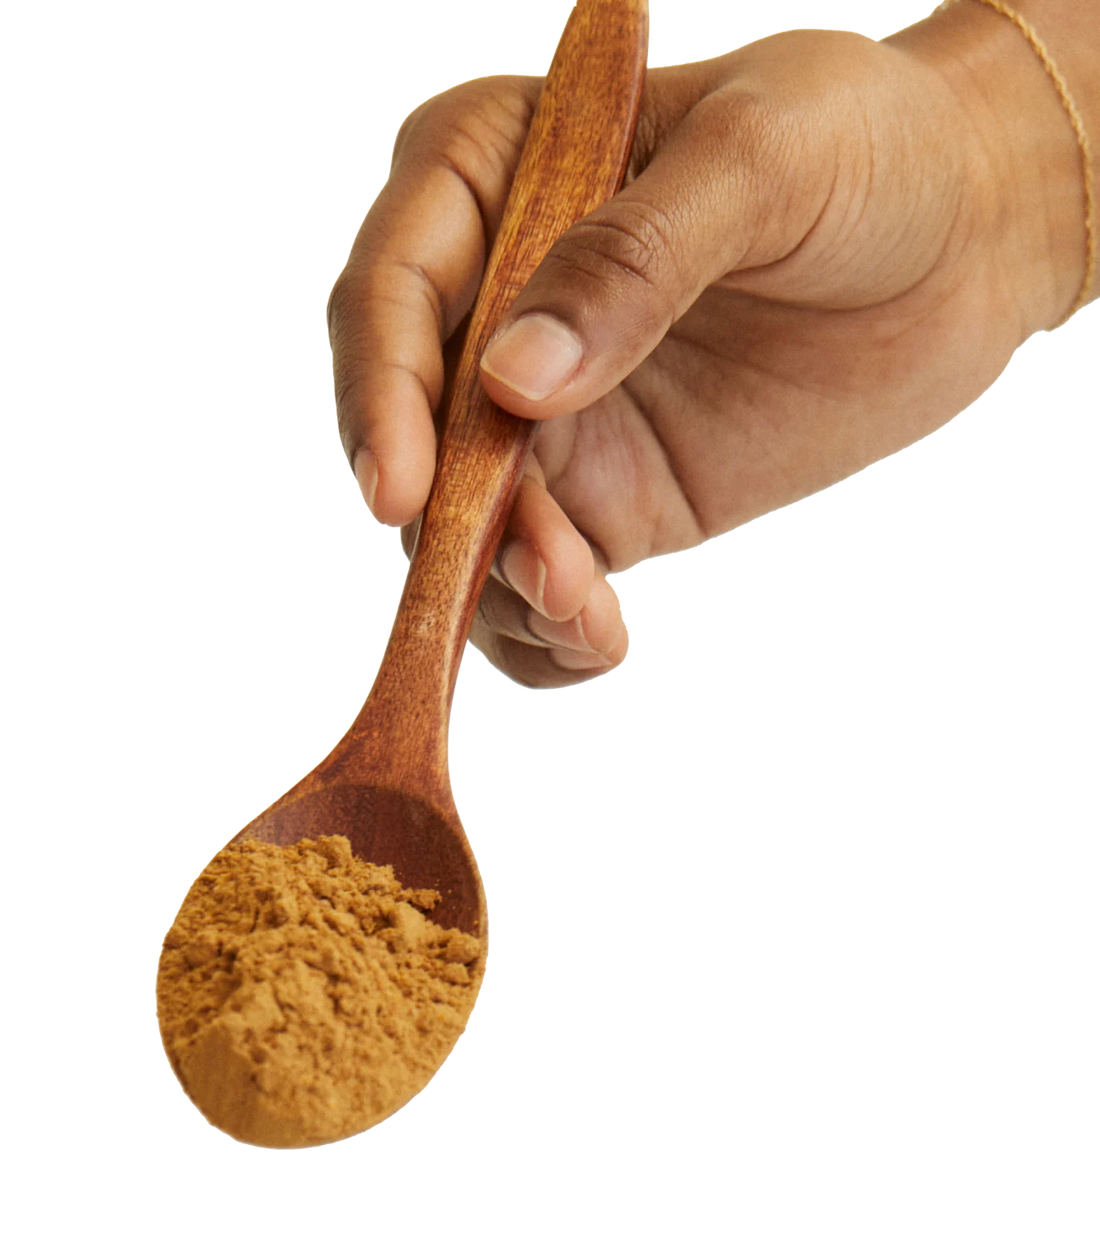 A hand holding a spoon with a natural plant extract